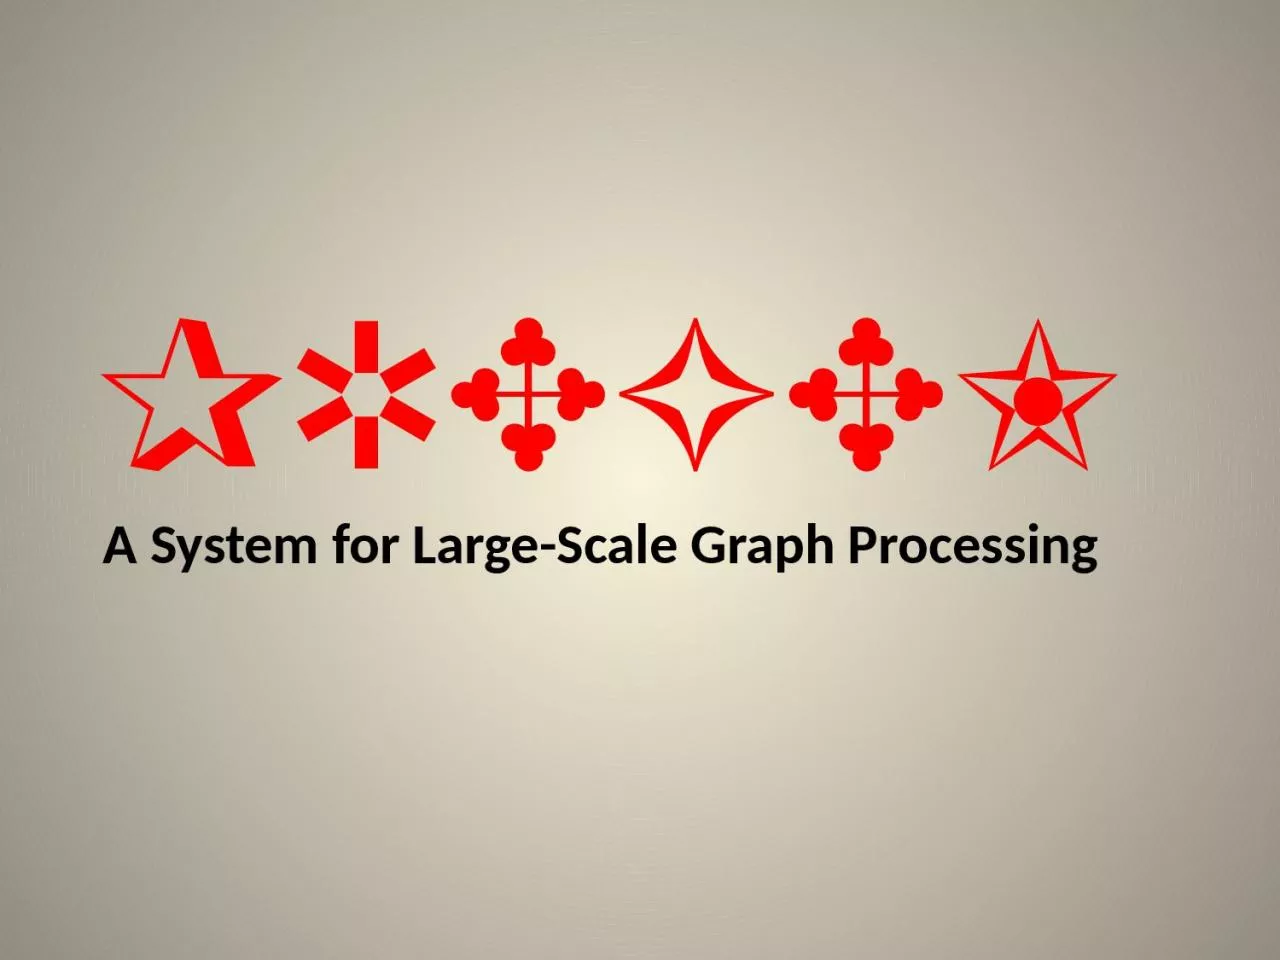 PREGEL A System for Large-Scale Graph Processing